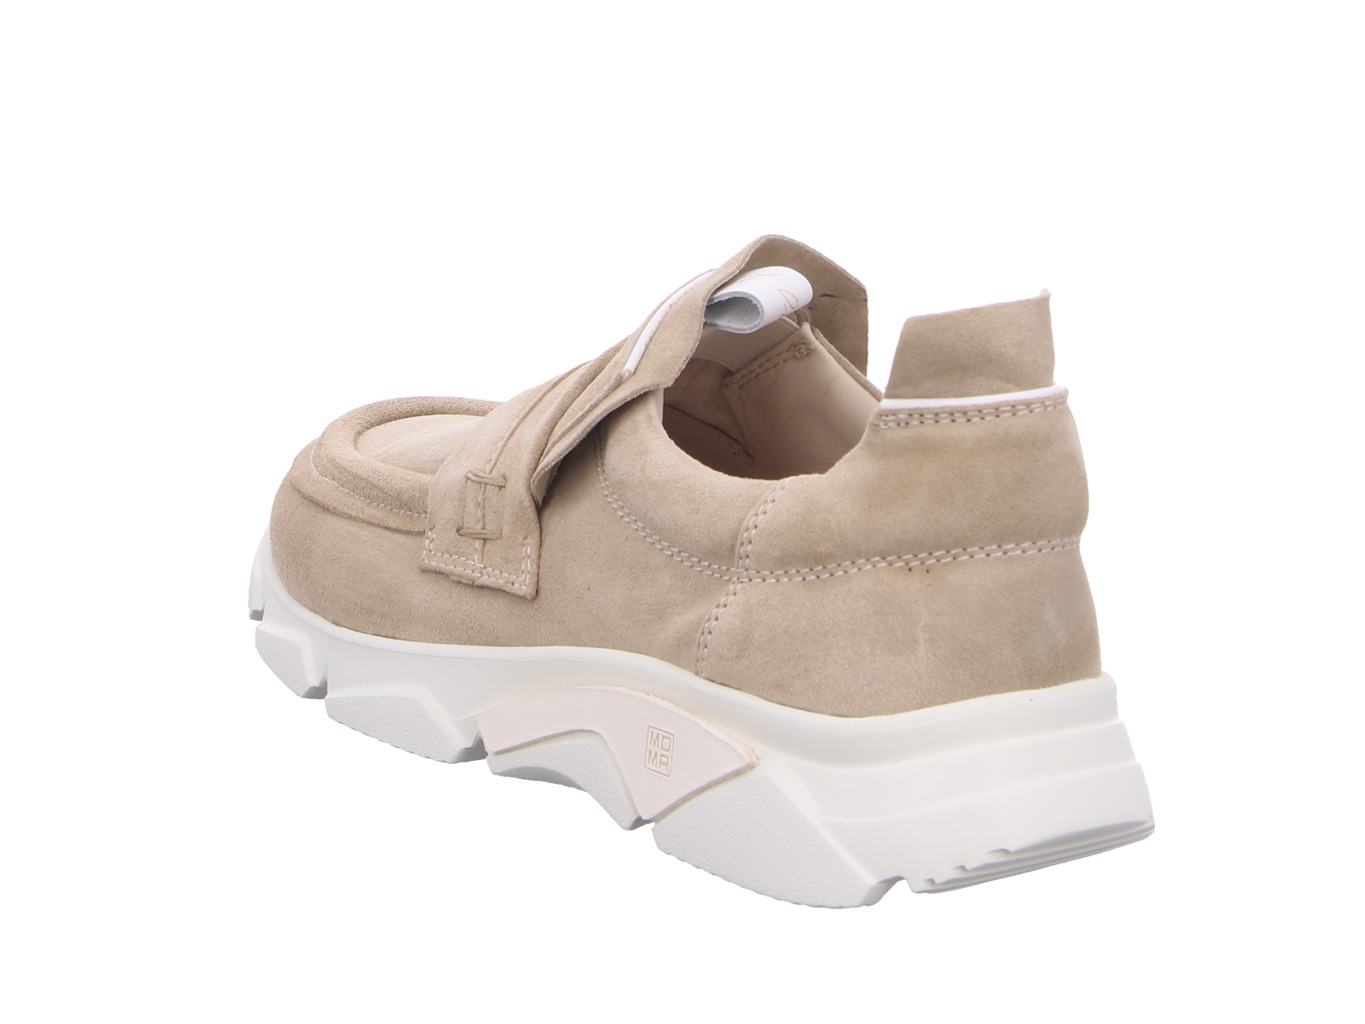 moma_pantofola_donna_beige_hell_3fs102_to_toy_visone_5123